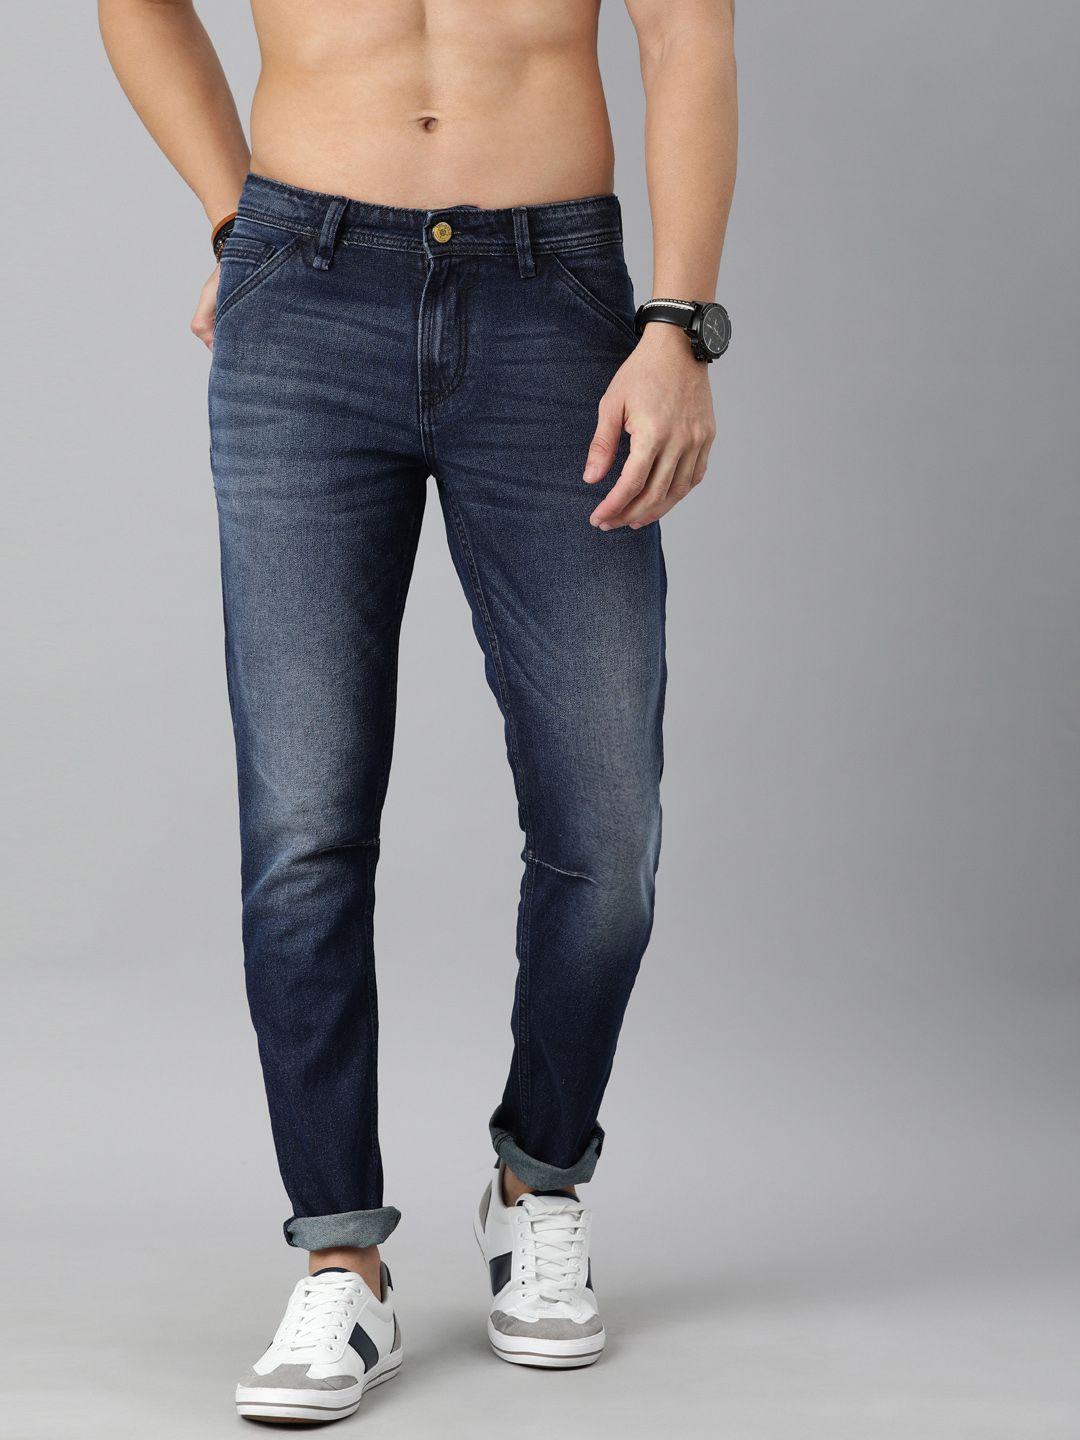 roadster-x-discovery-adventures-men-blue-slim-tapered-fit-water-repellent-finish-jeans